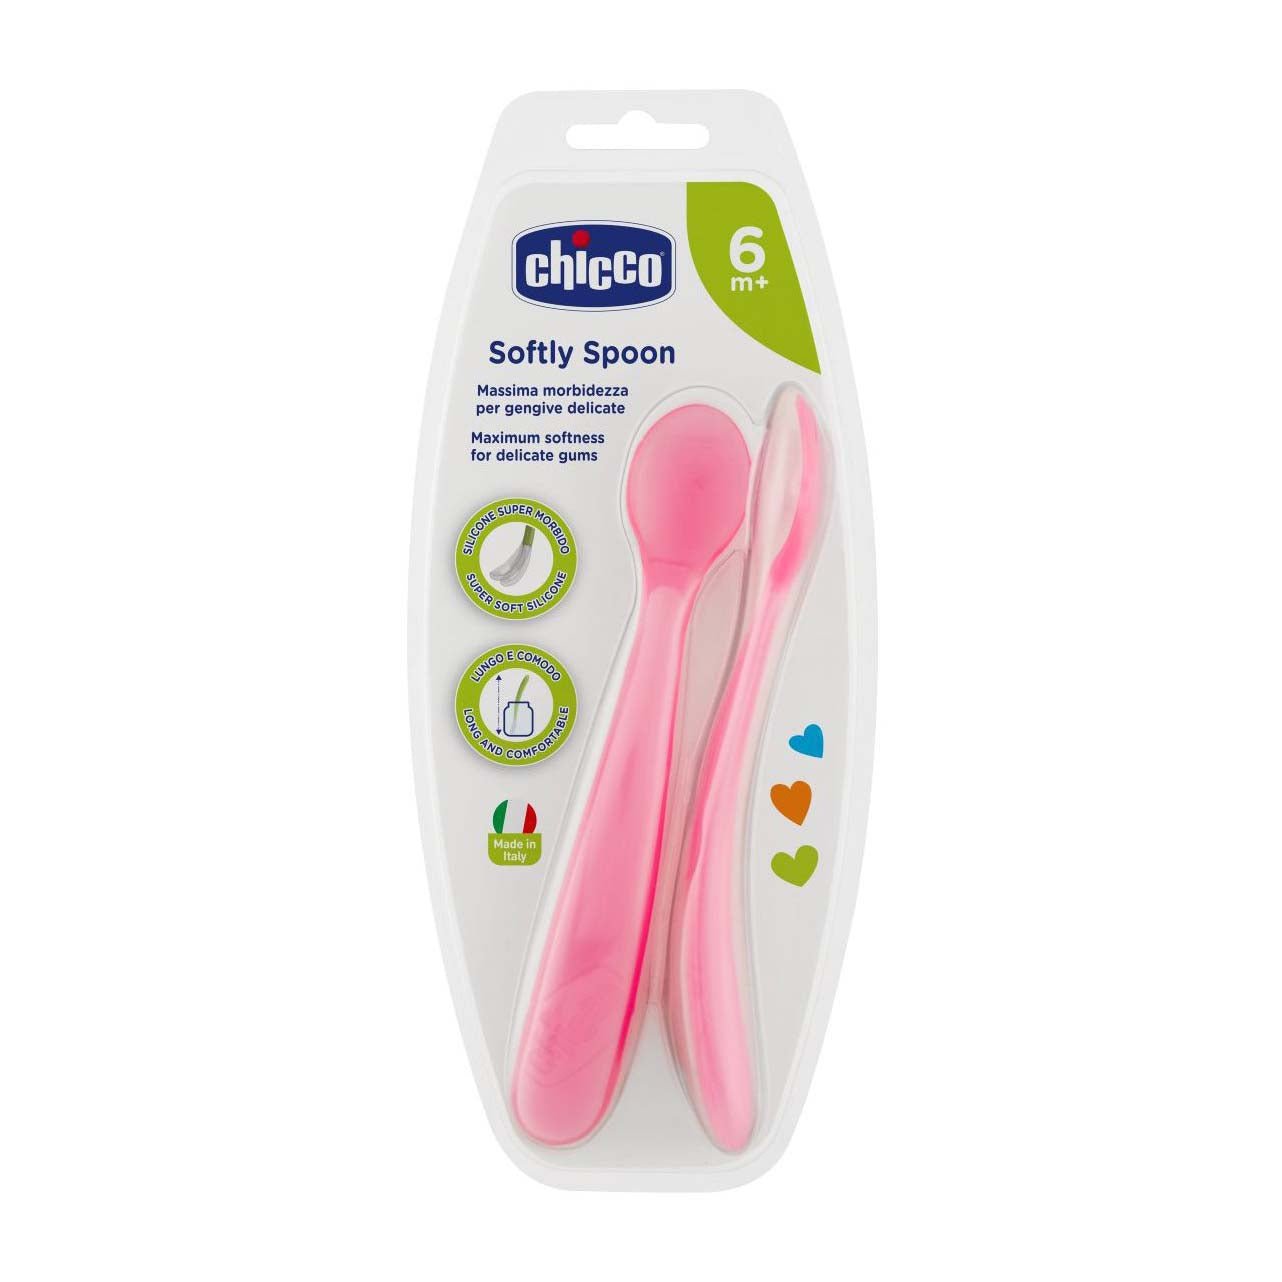 Chicco Soft Silicone Spoon 6m+ 2Pcs - Pink - Bloom Pharmacy